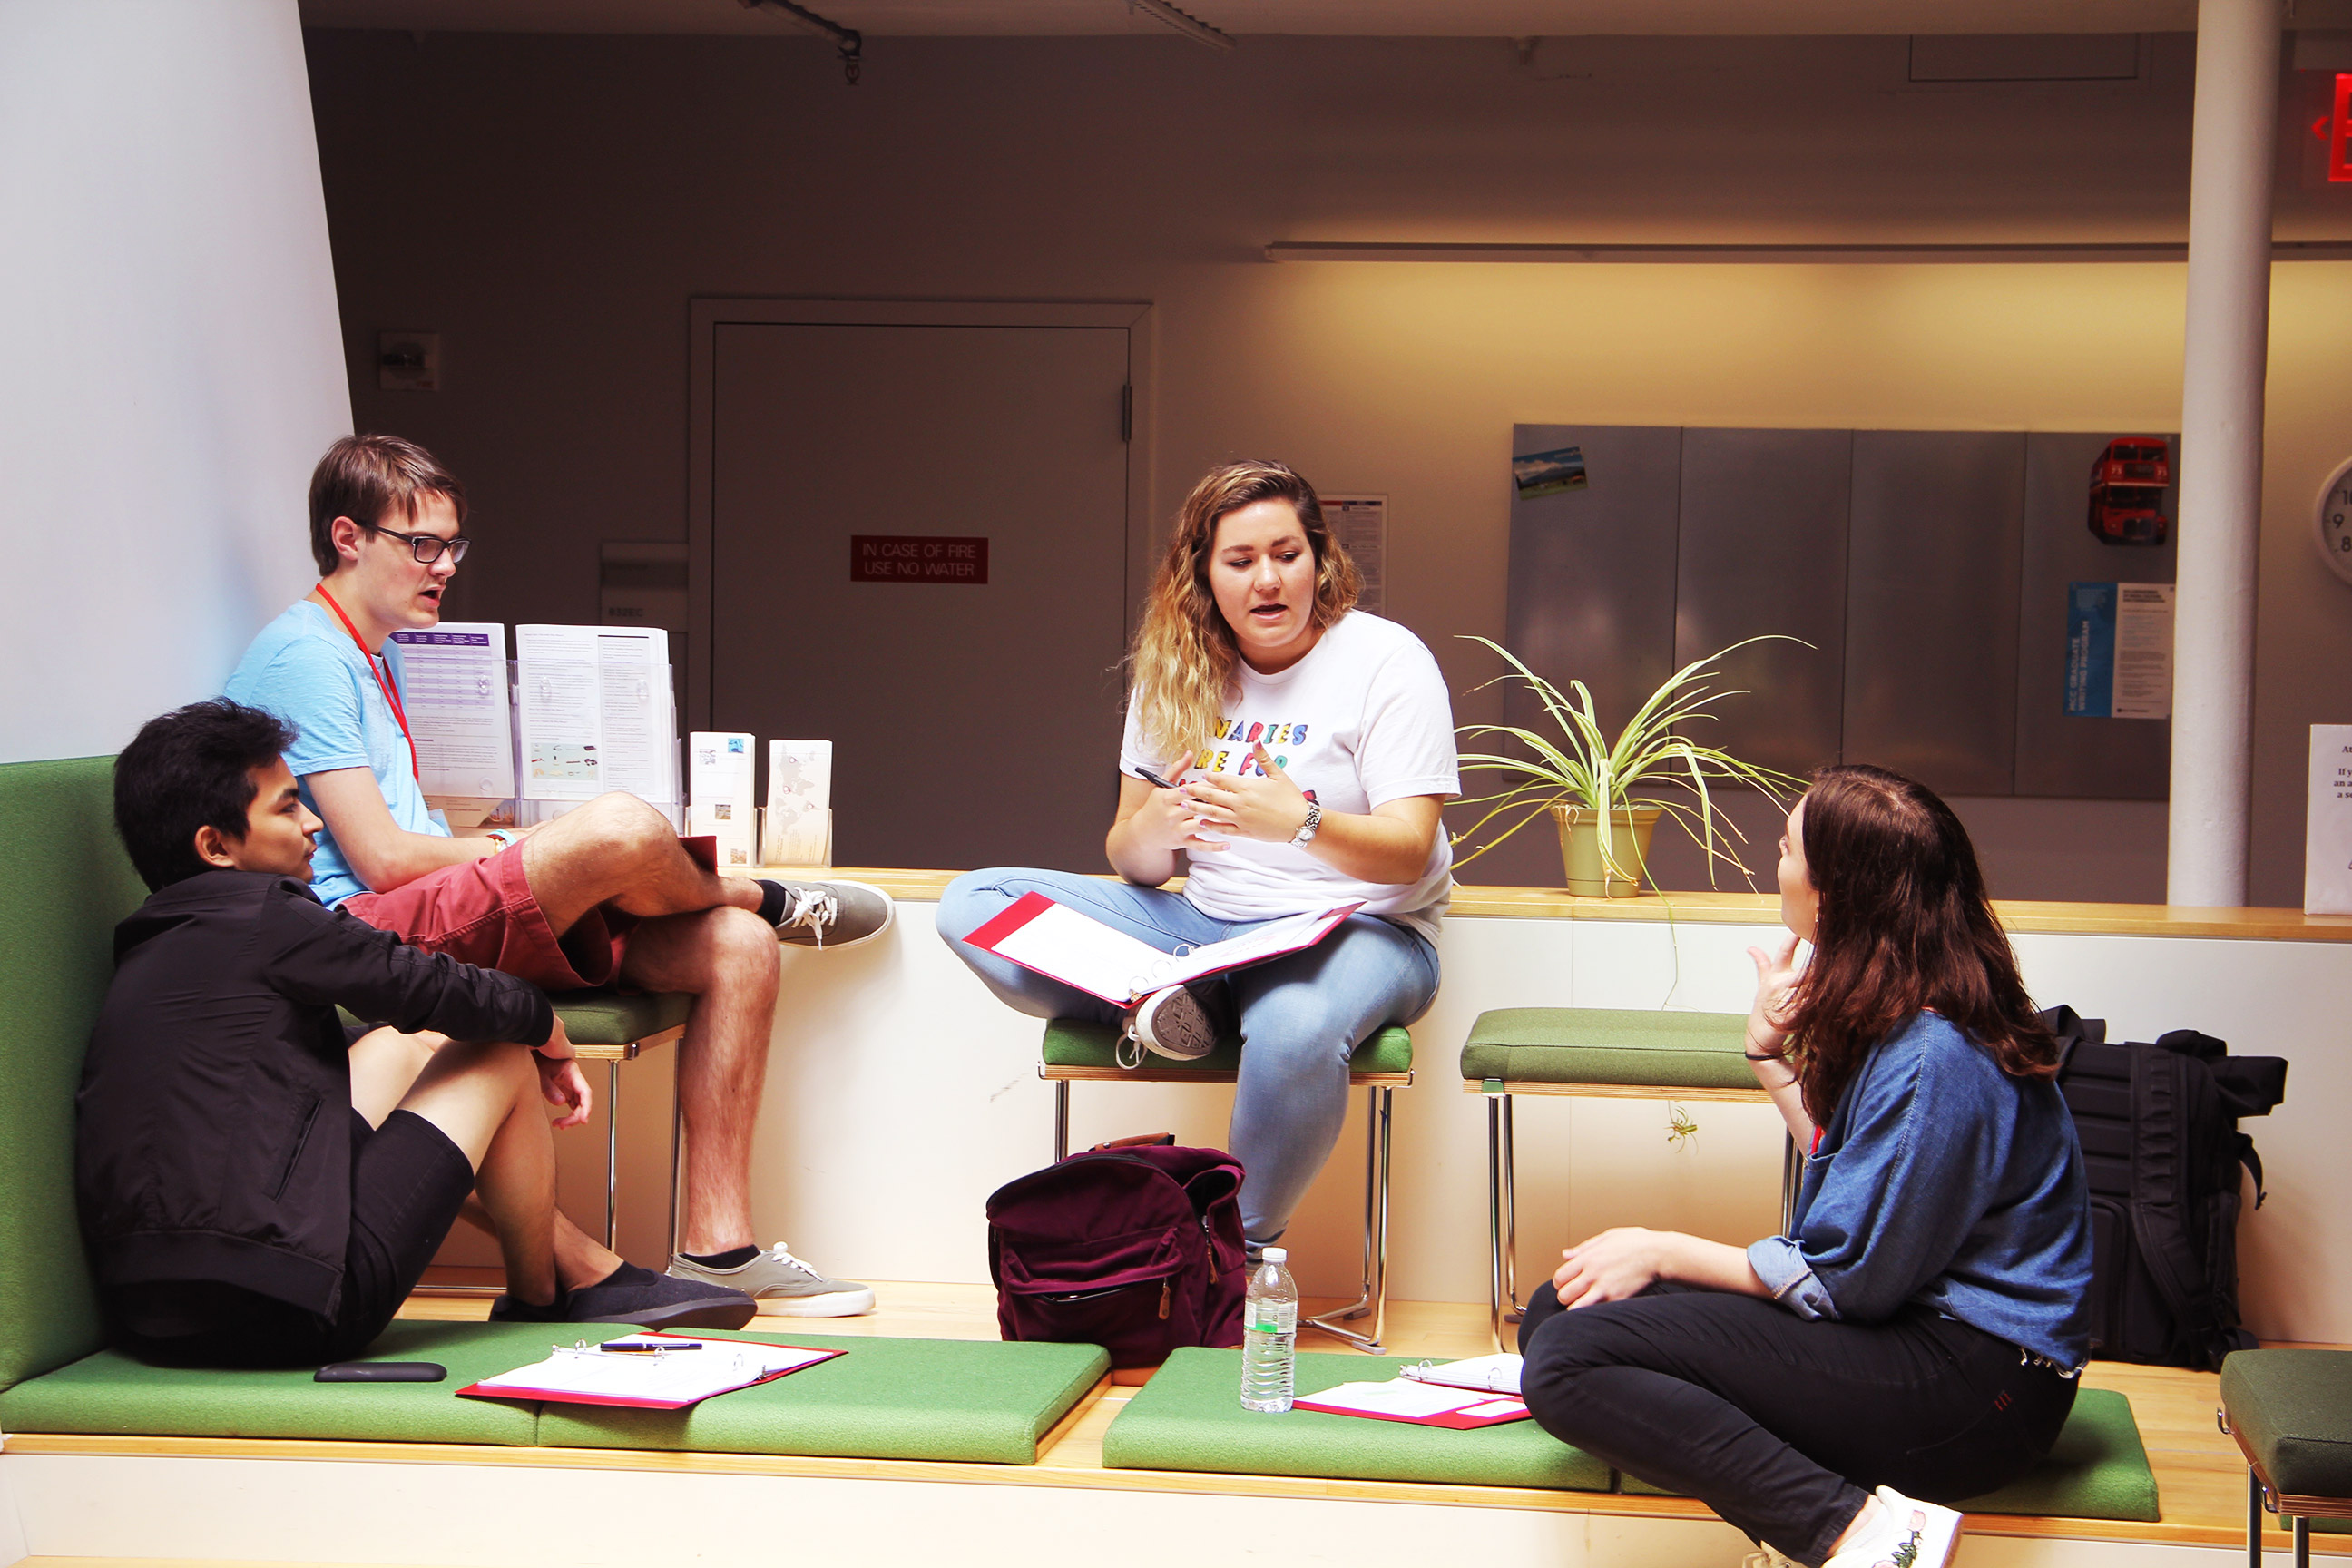 College students casually meeting in study area